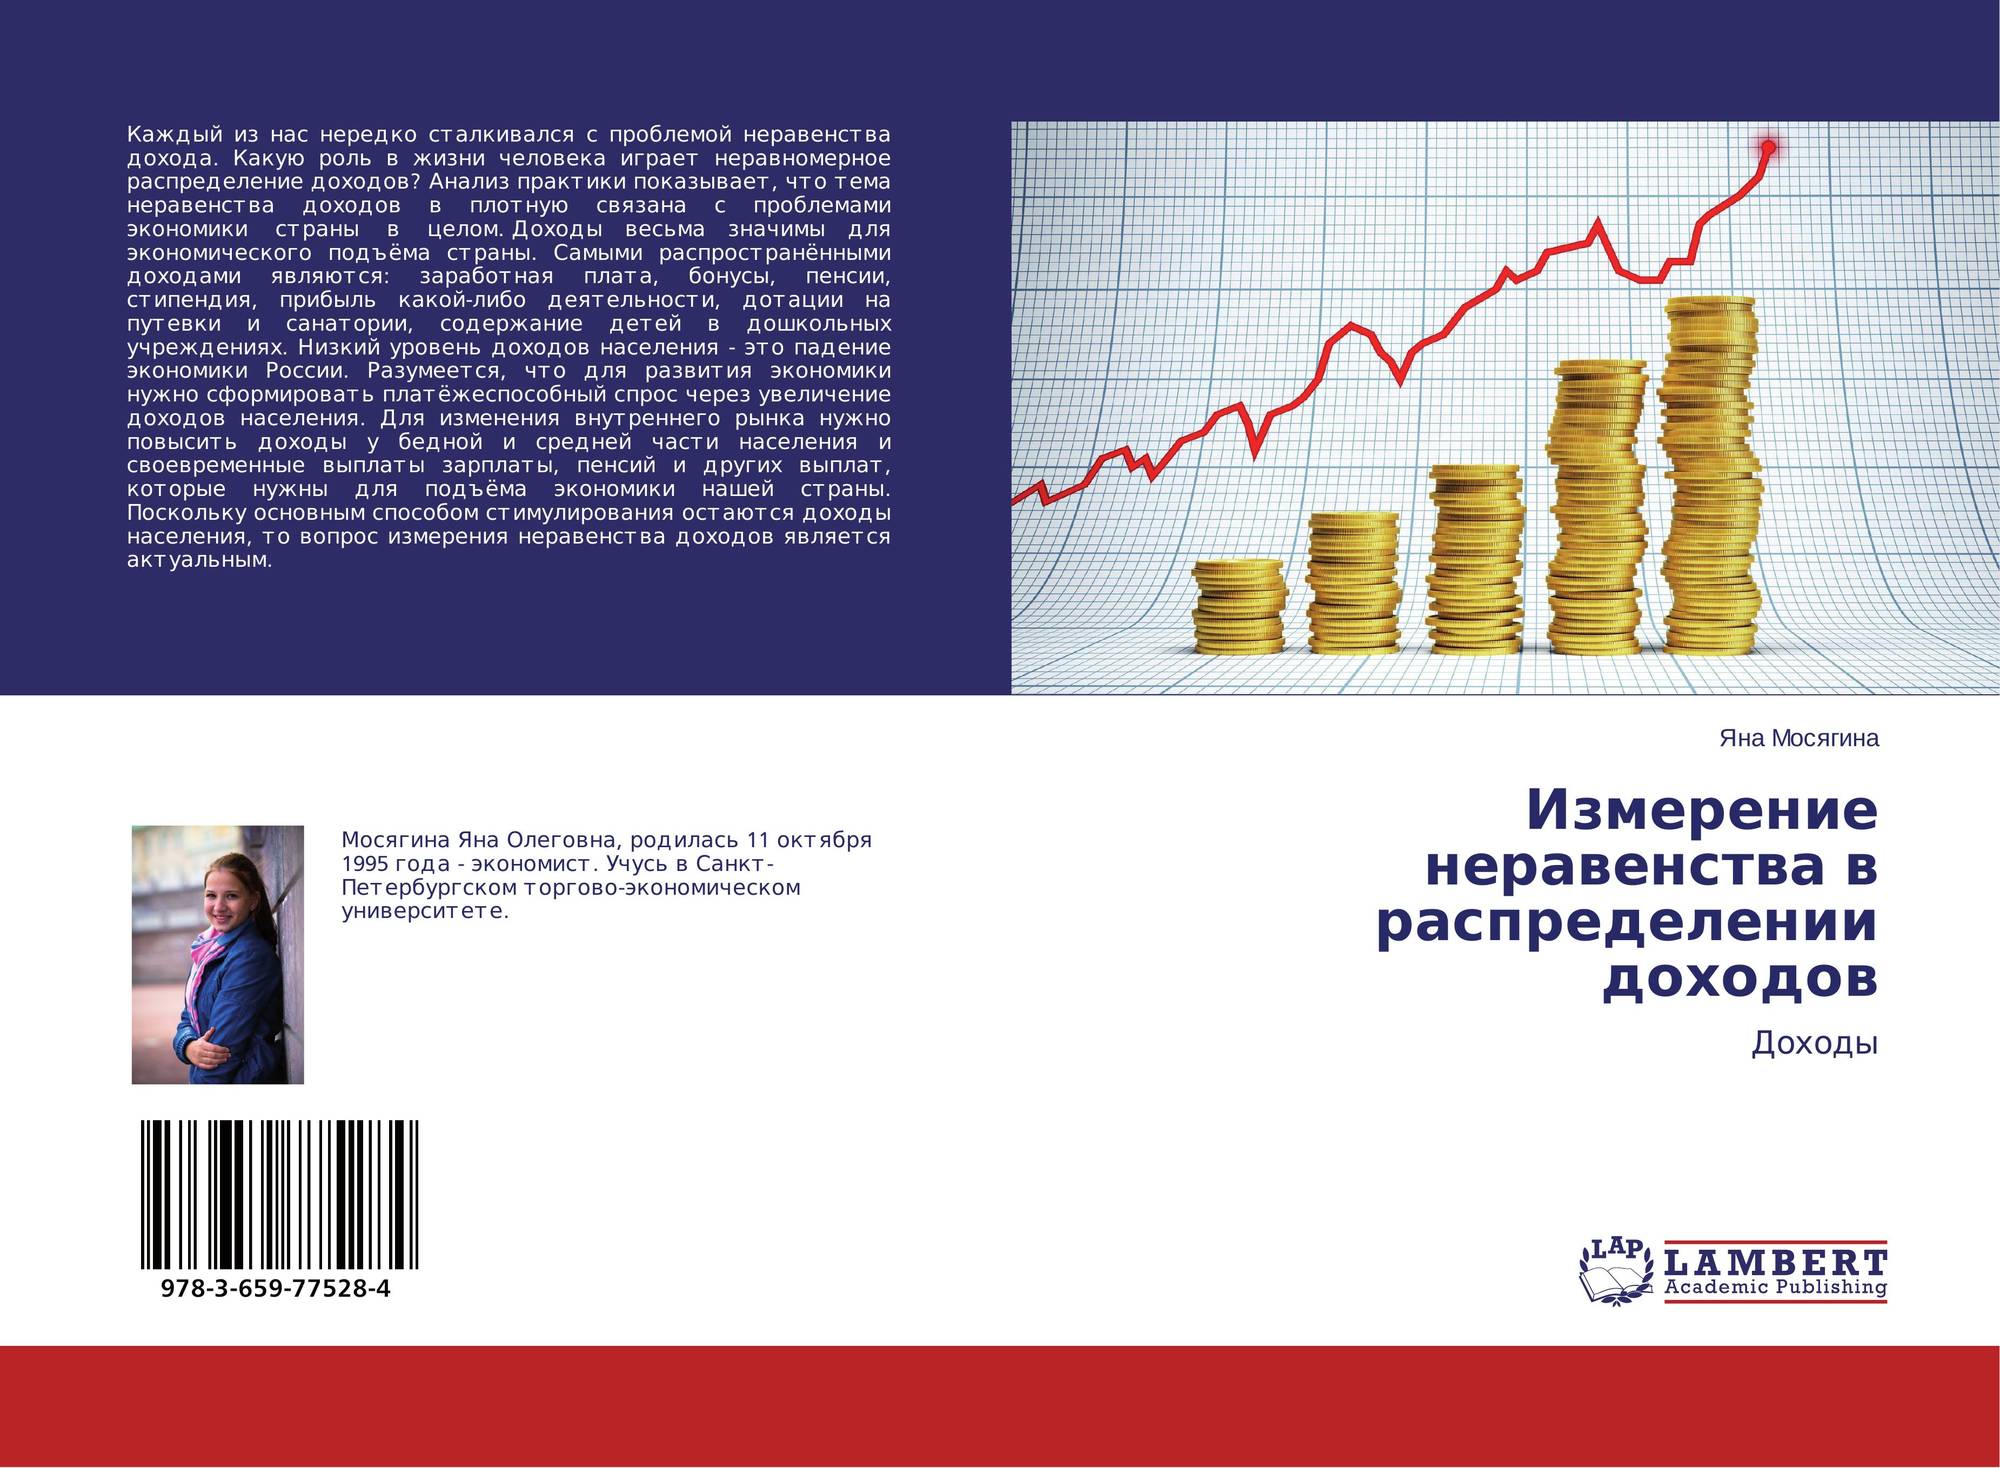 Forex what do periods mean forex news on the ruble